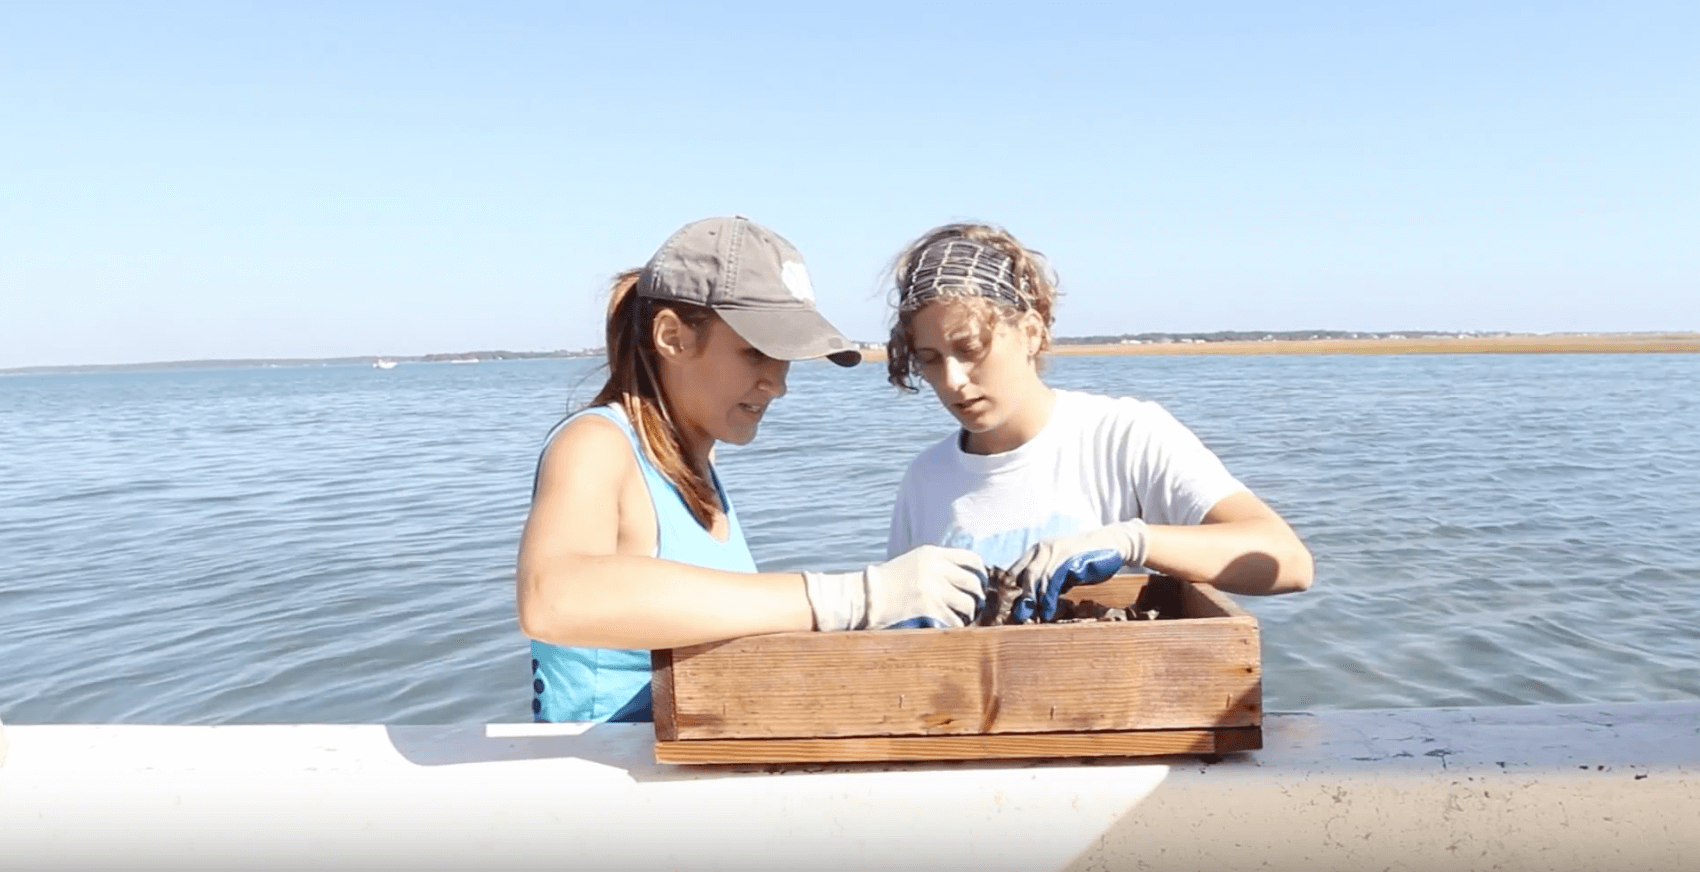 Carrie Hamilton and fellow student investigate a box of marine wildlife while standing in the water beside a boat.